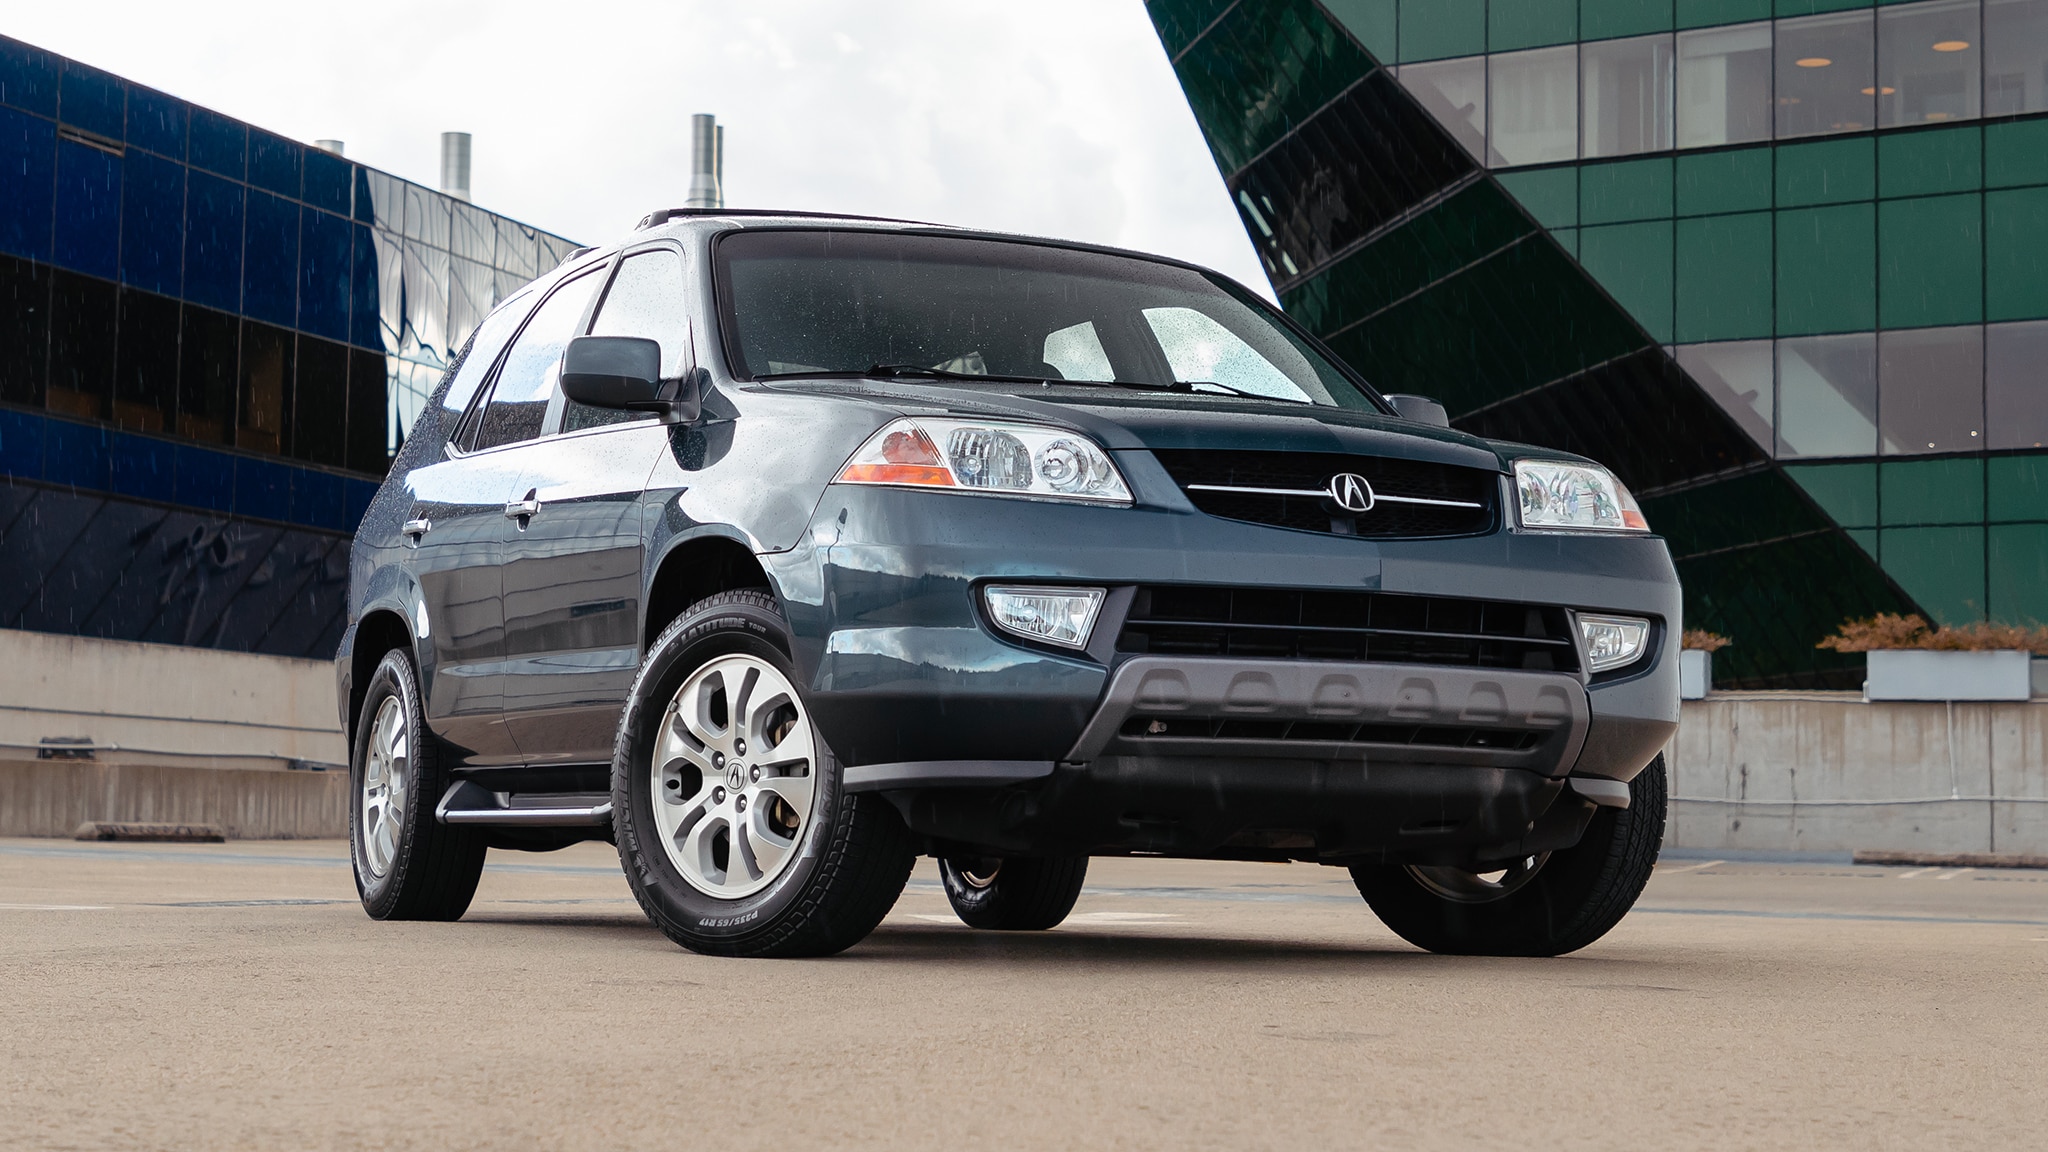 Classic Drive: The 2003 Acura MDX Takes Us Back to a Time When Luxury Meant  Simplicity